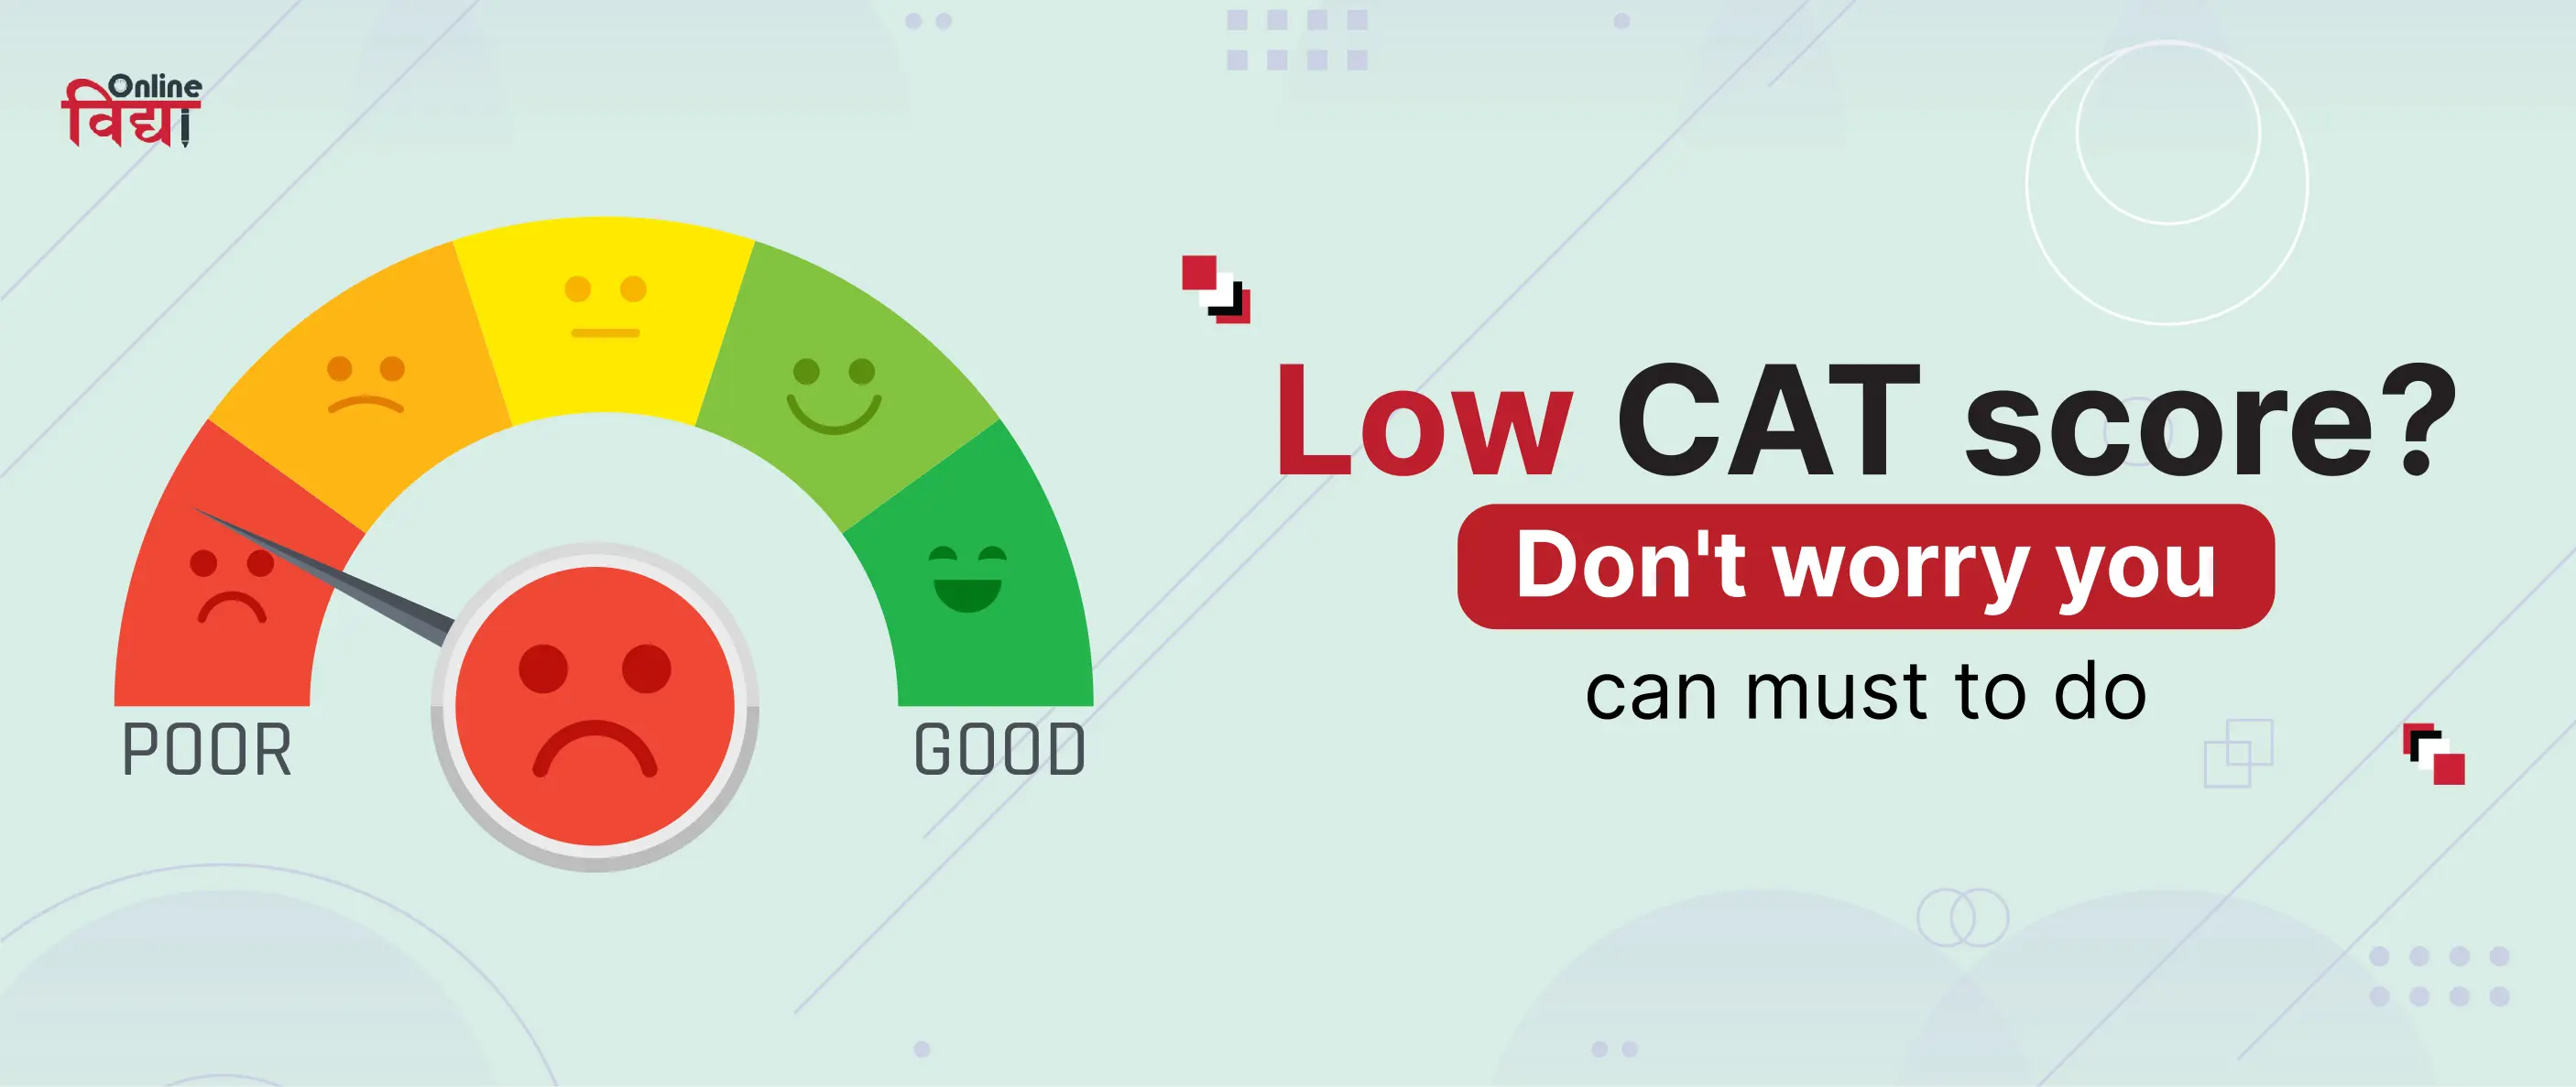 Low CAT score? Don't worry you can must do